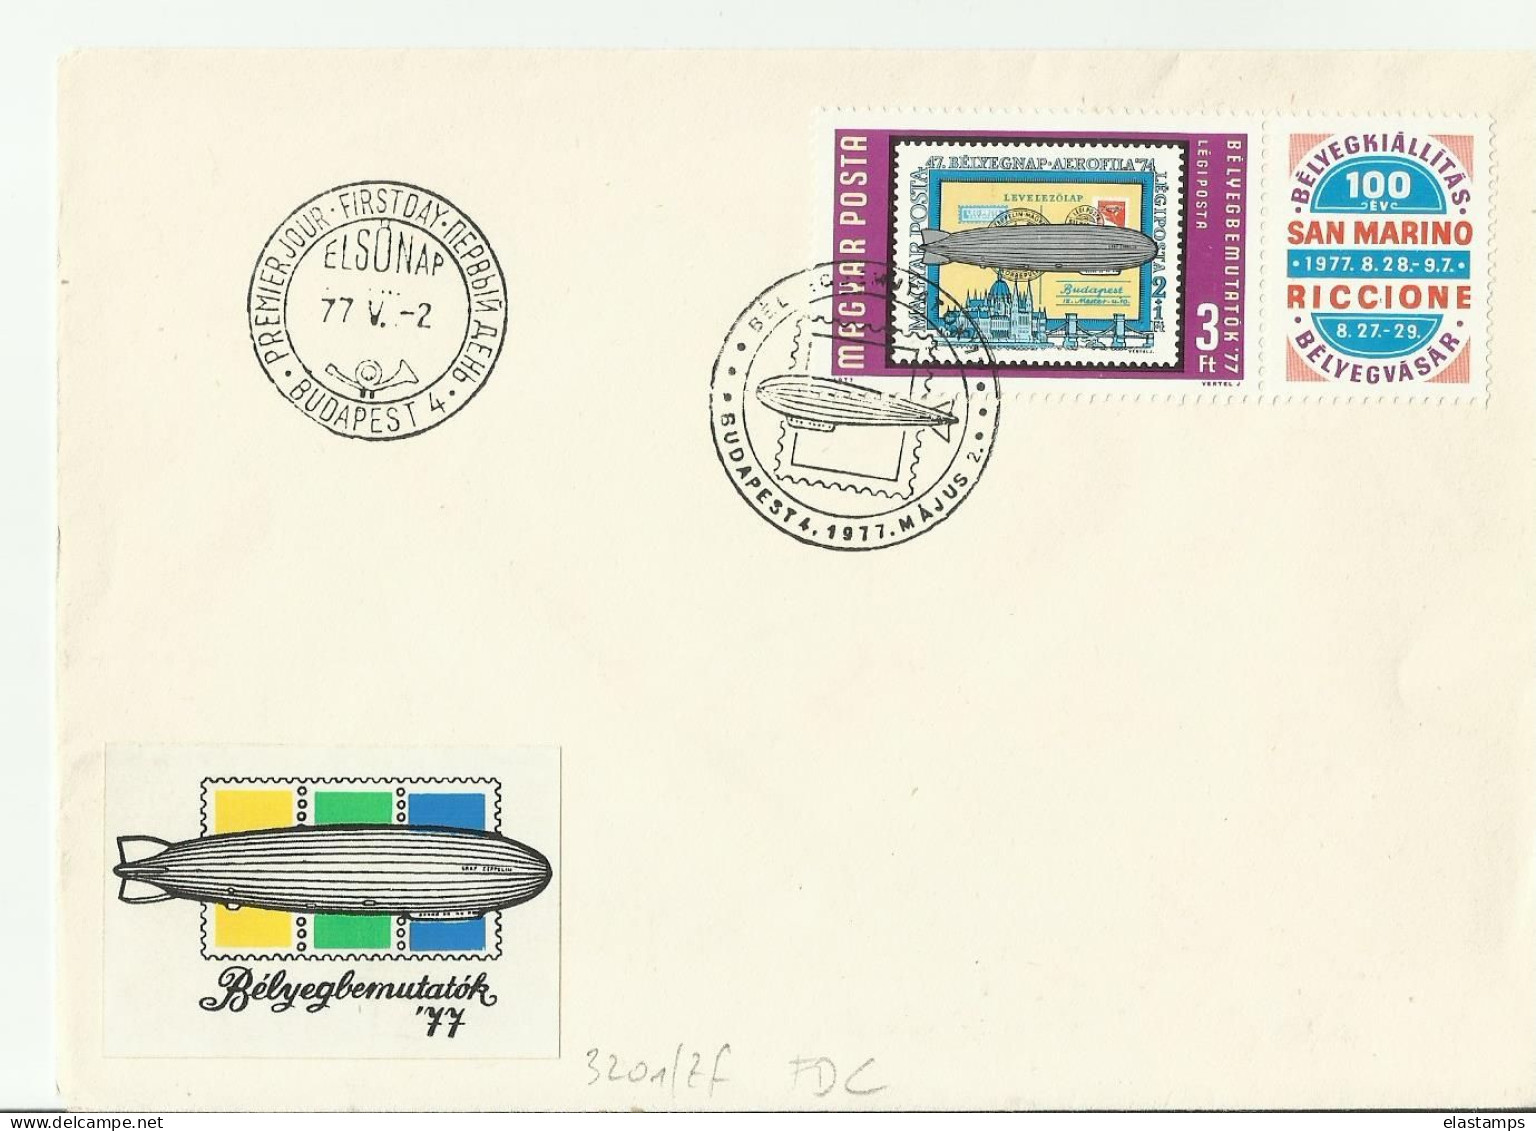 ZEPPELIN UNGARY FDC 1977 - FDC